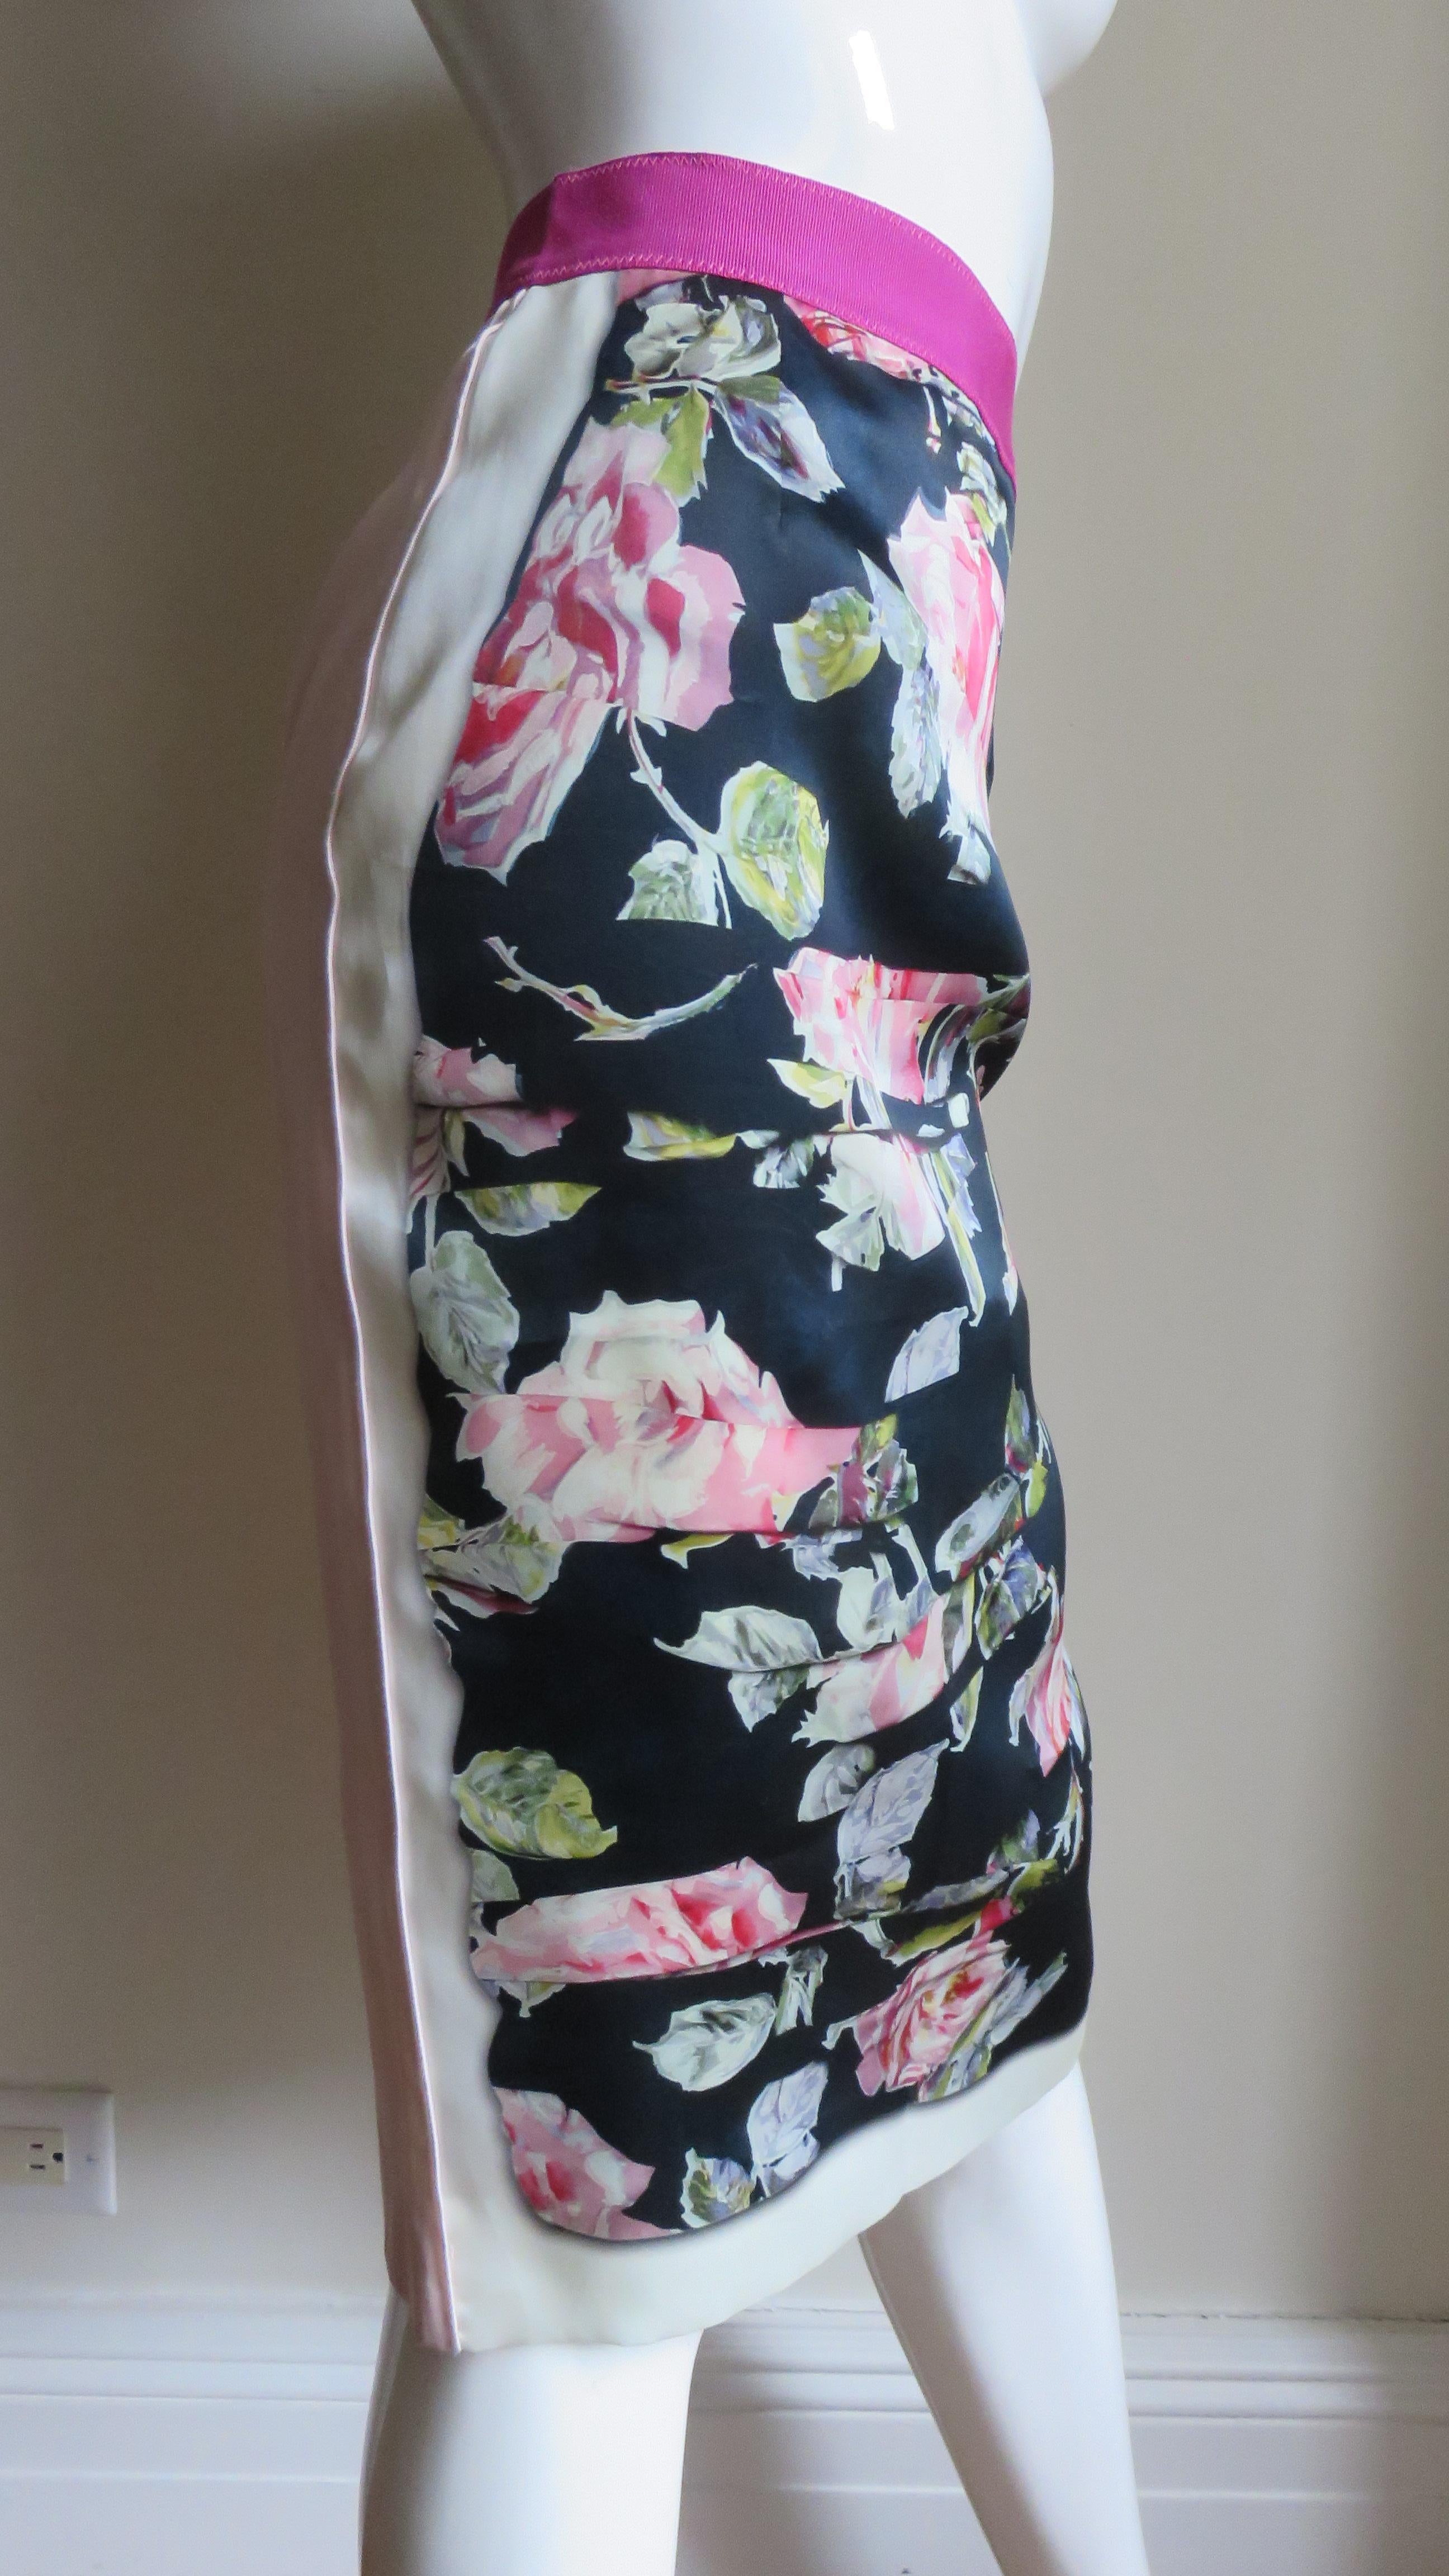 Dolce & Gabbana New Color Block Silk Skirt In Excellent Condition For Sale In Water Mill, NY